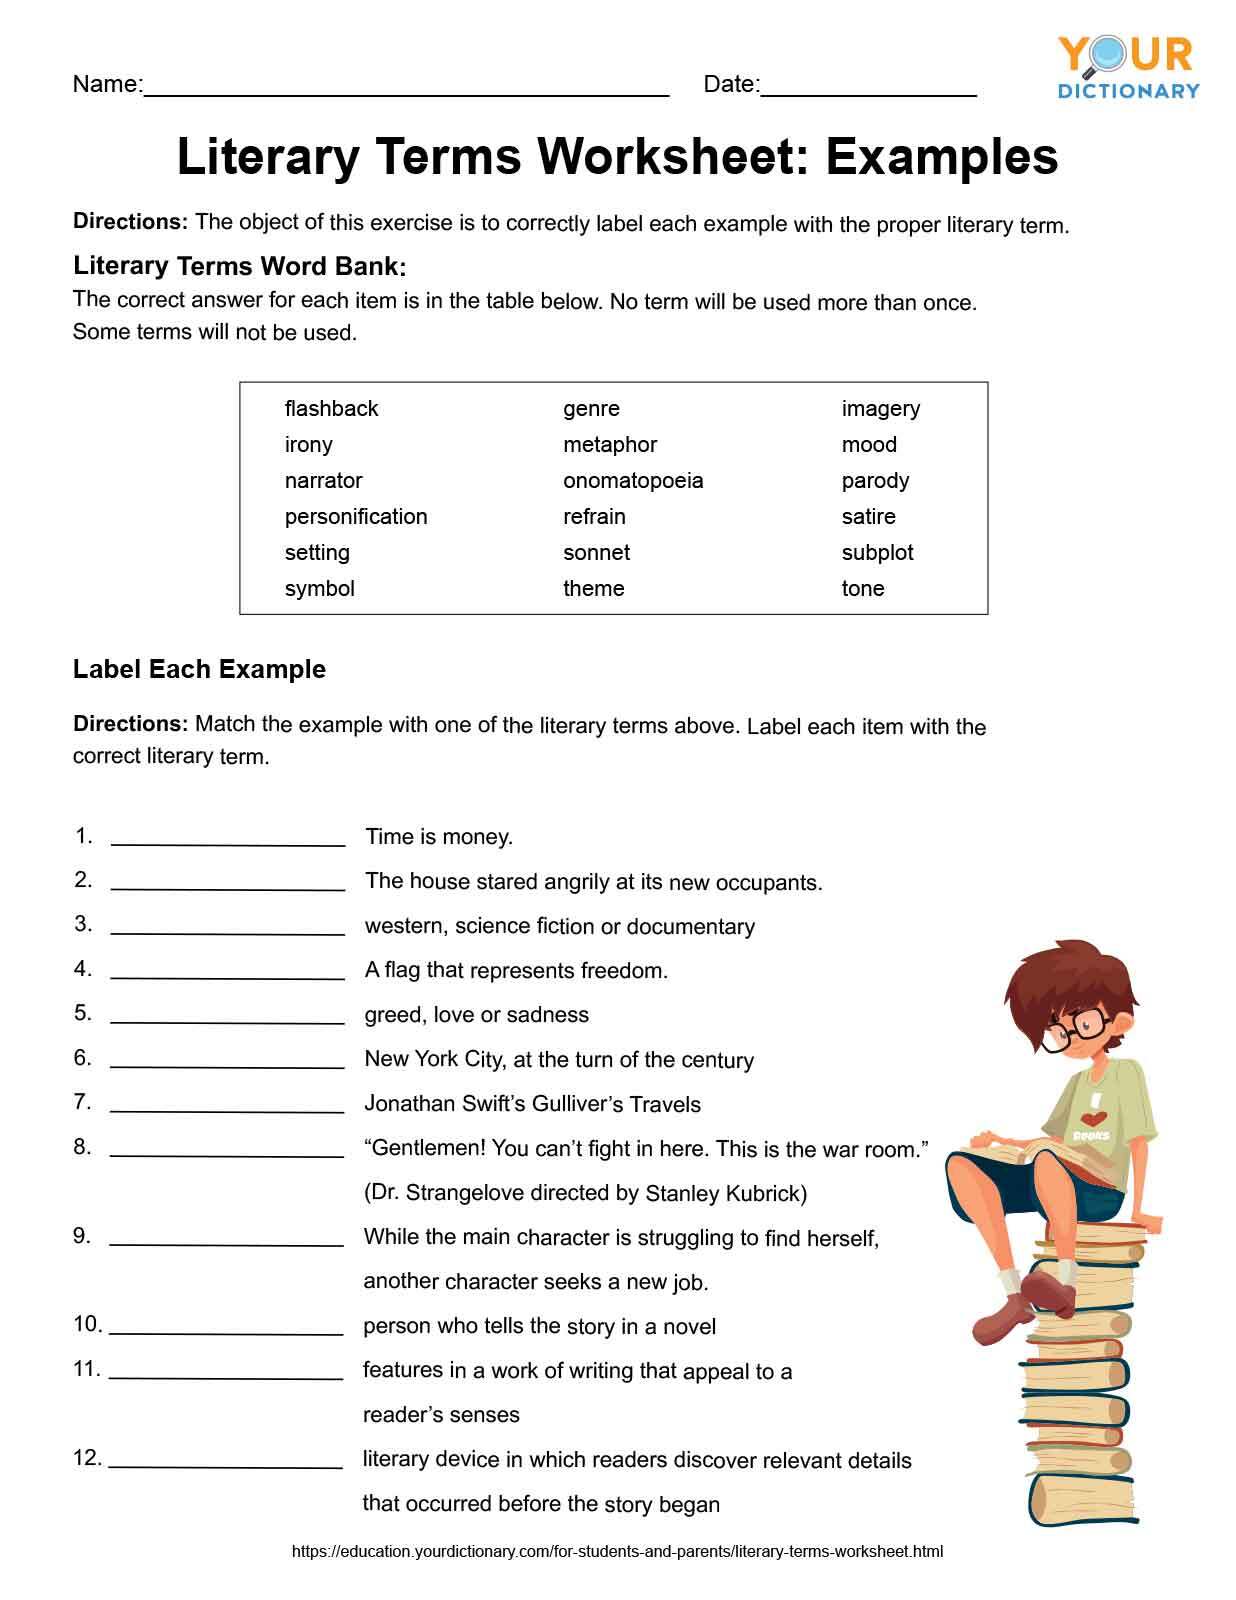 Literary Terms Worksheets for Review & Practice